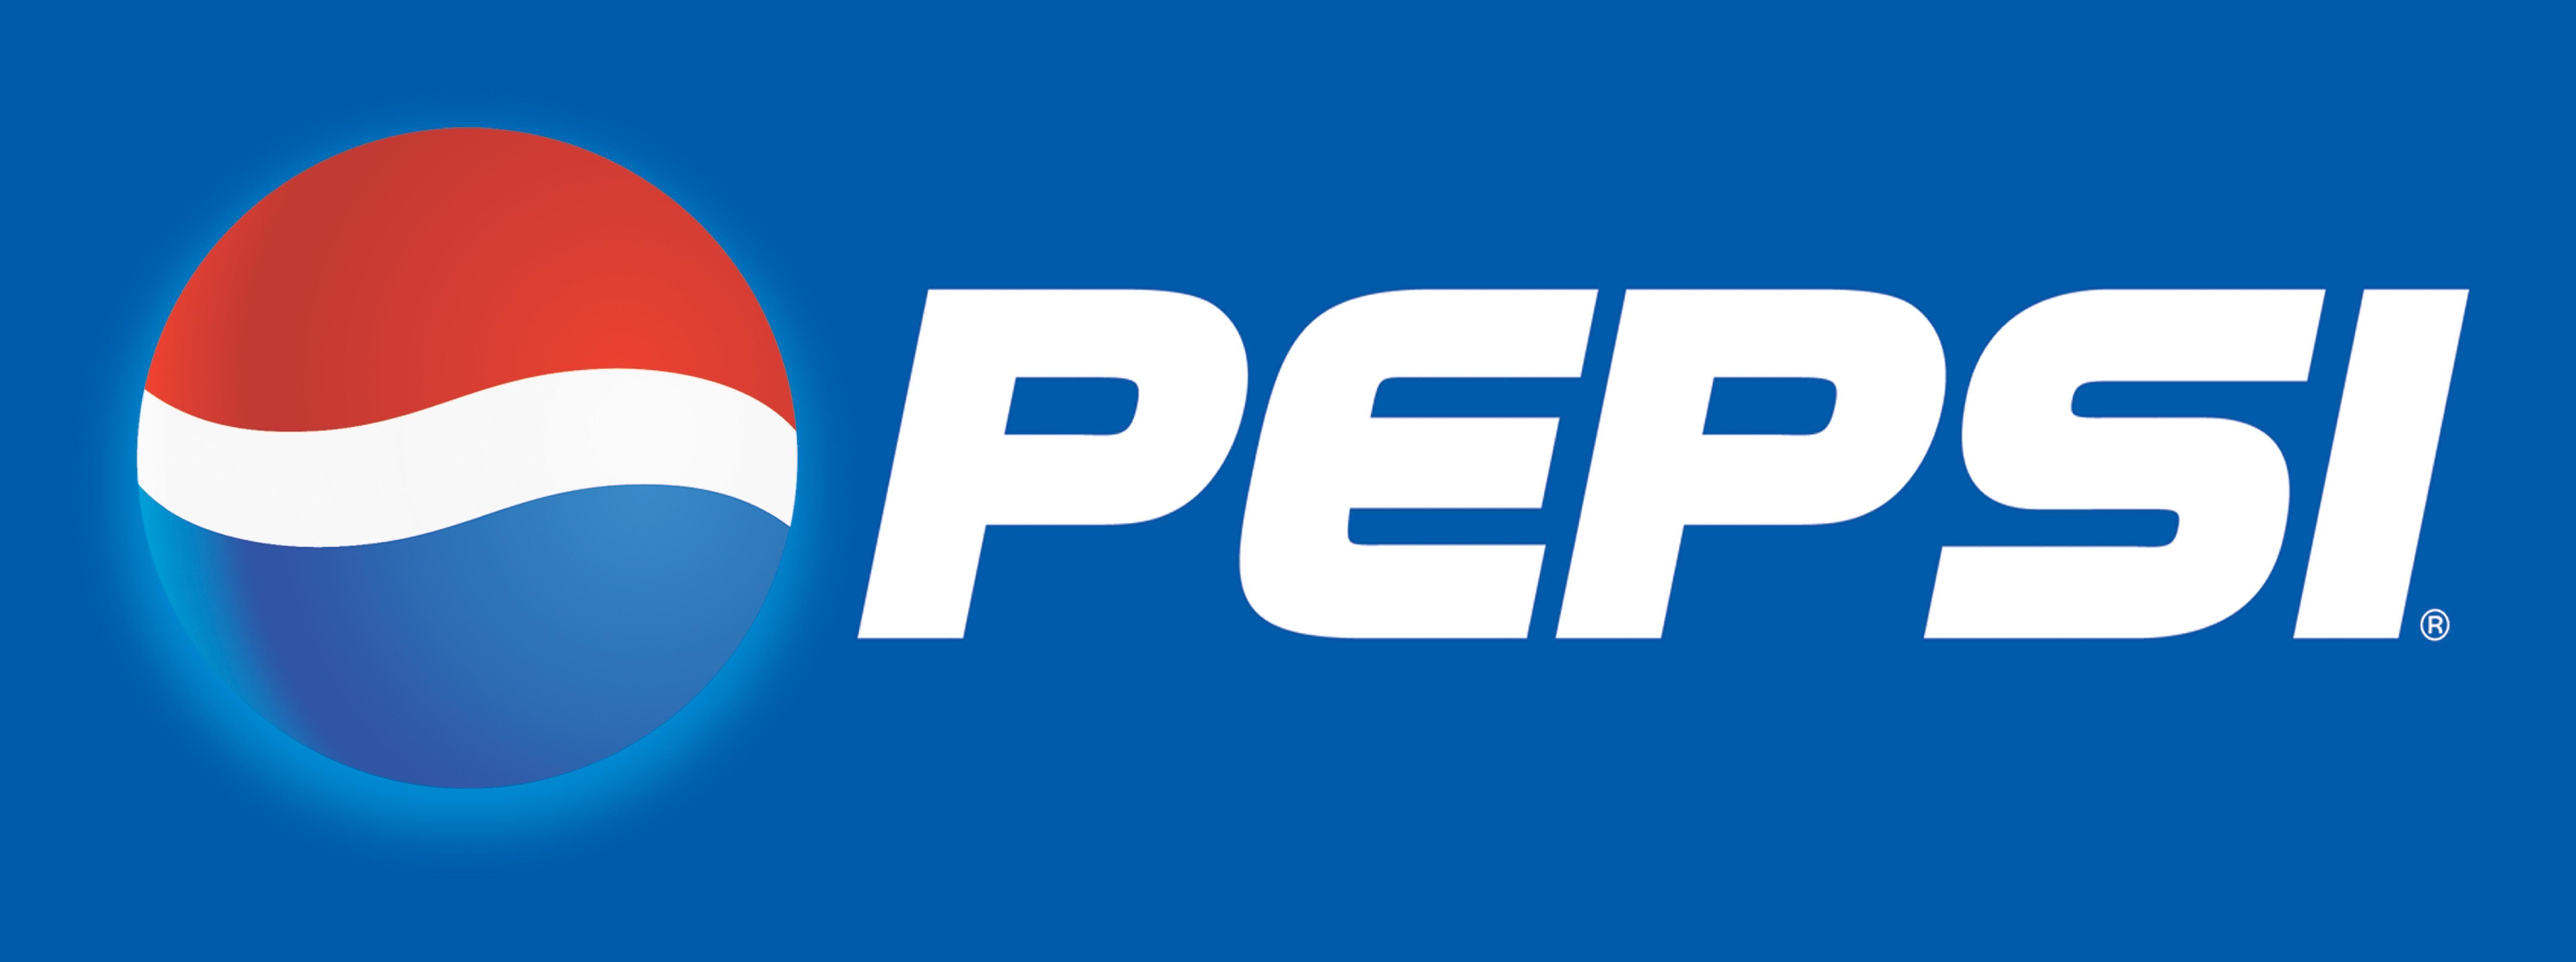 Dividends Forever! Why I Am Buying Pepsi Inc. NYSE:PEP